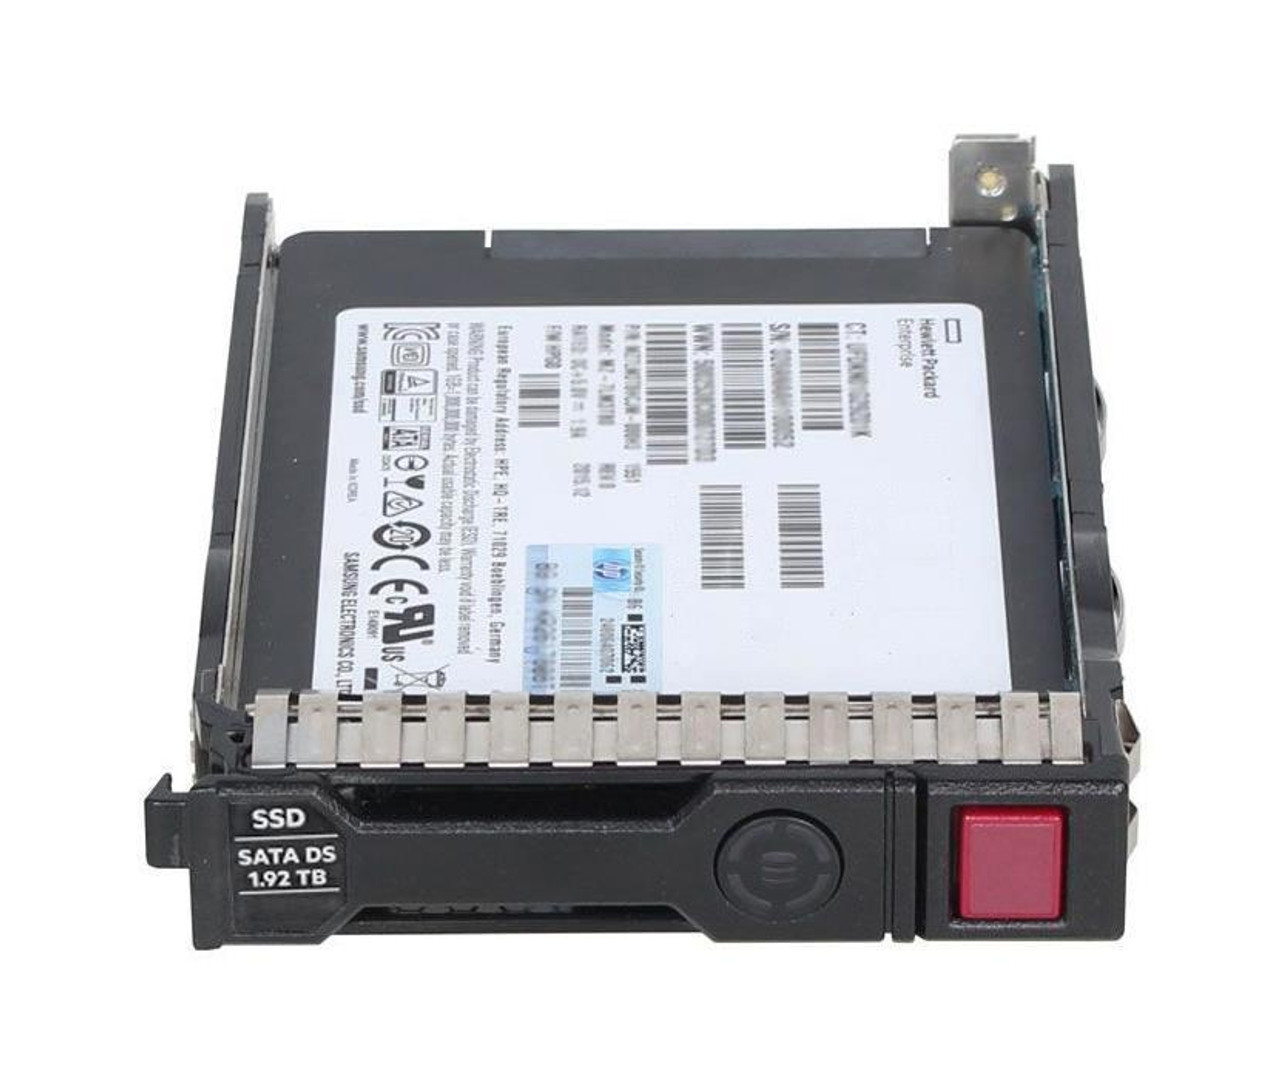 P09722-B21#0D1 HPE 1.92TB SATA 6Gbps Mixed Use 2.5-inch Internal Solid State Drive (SSD) with Smart Carrier